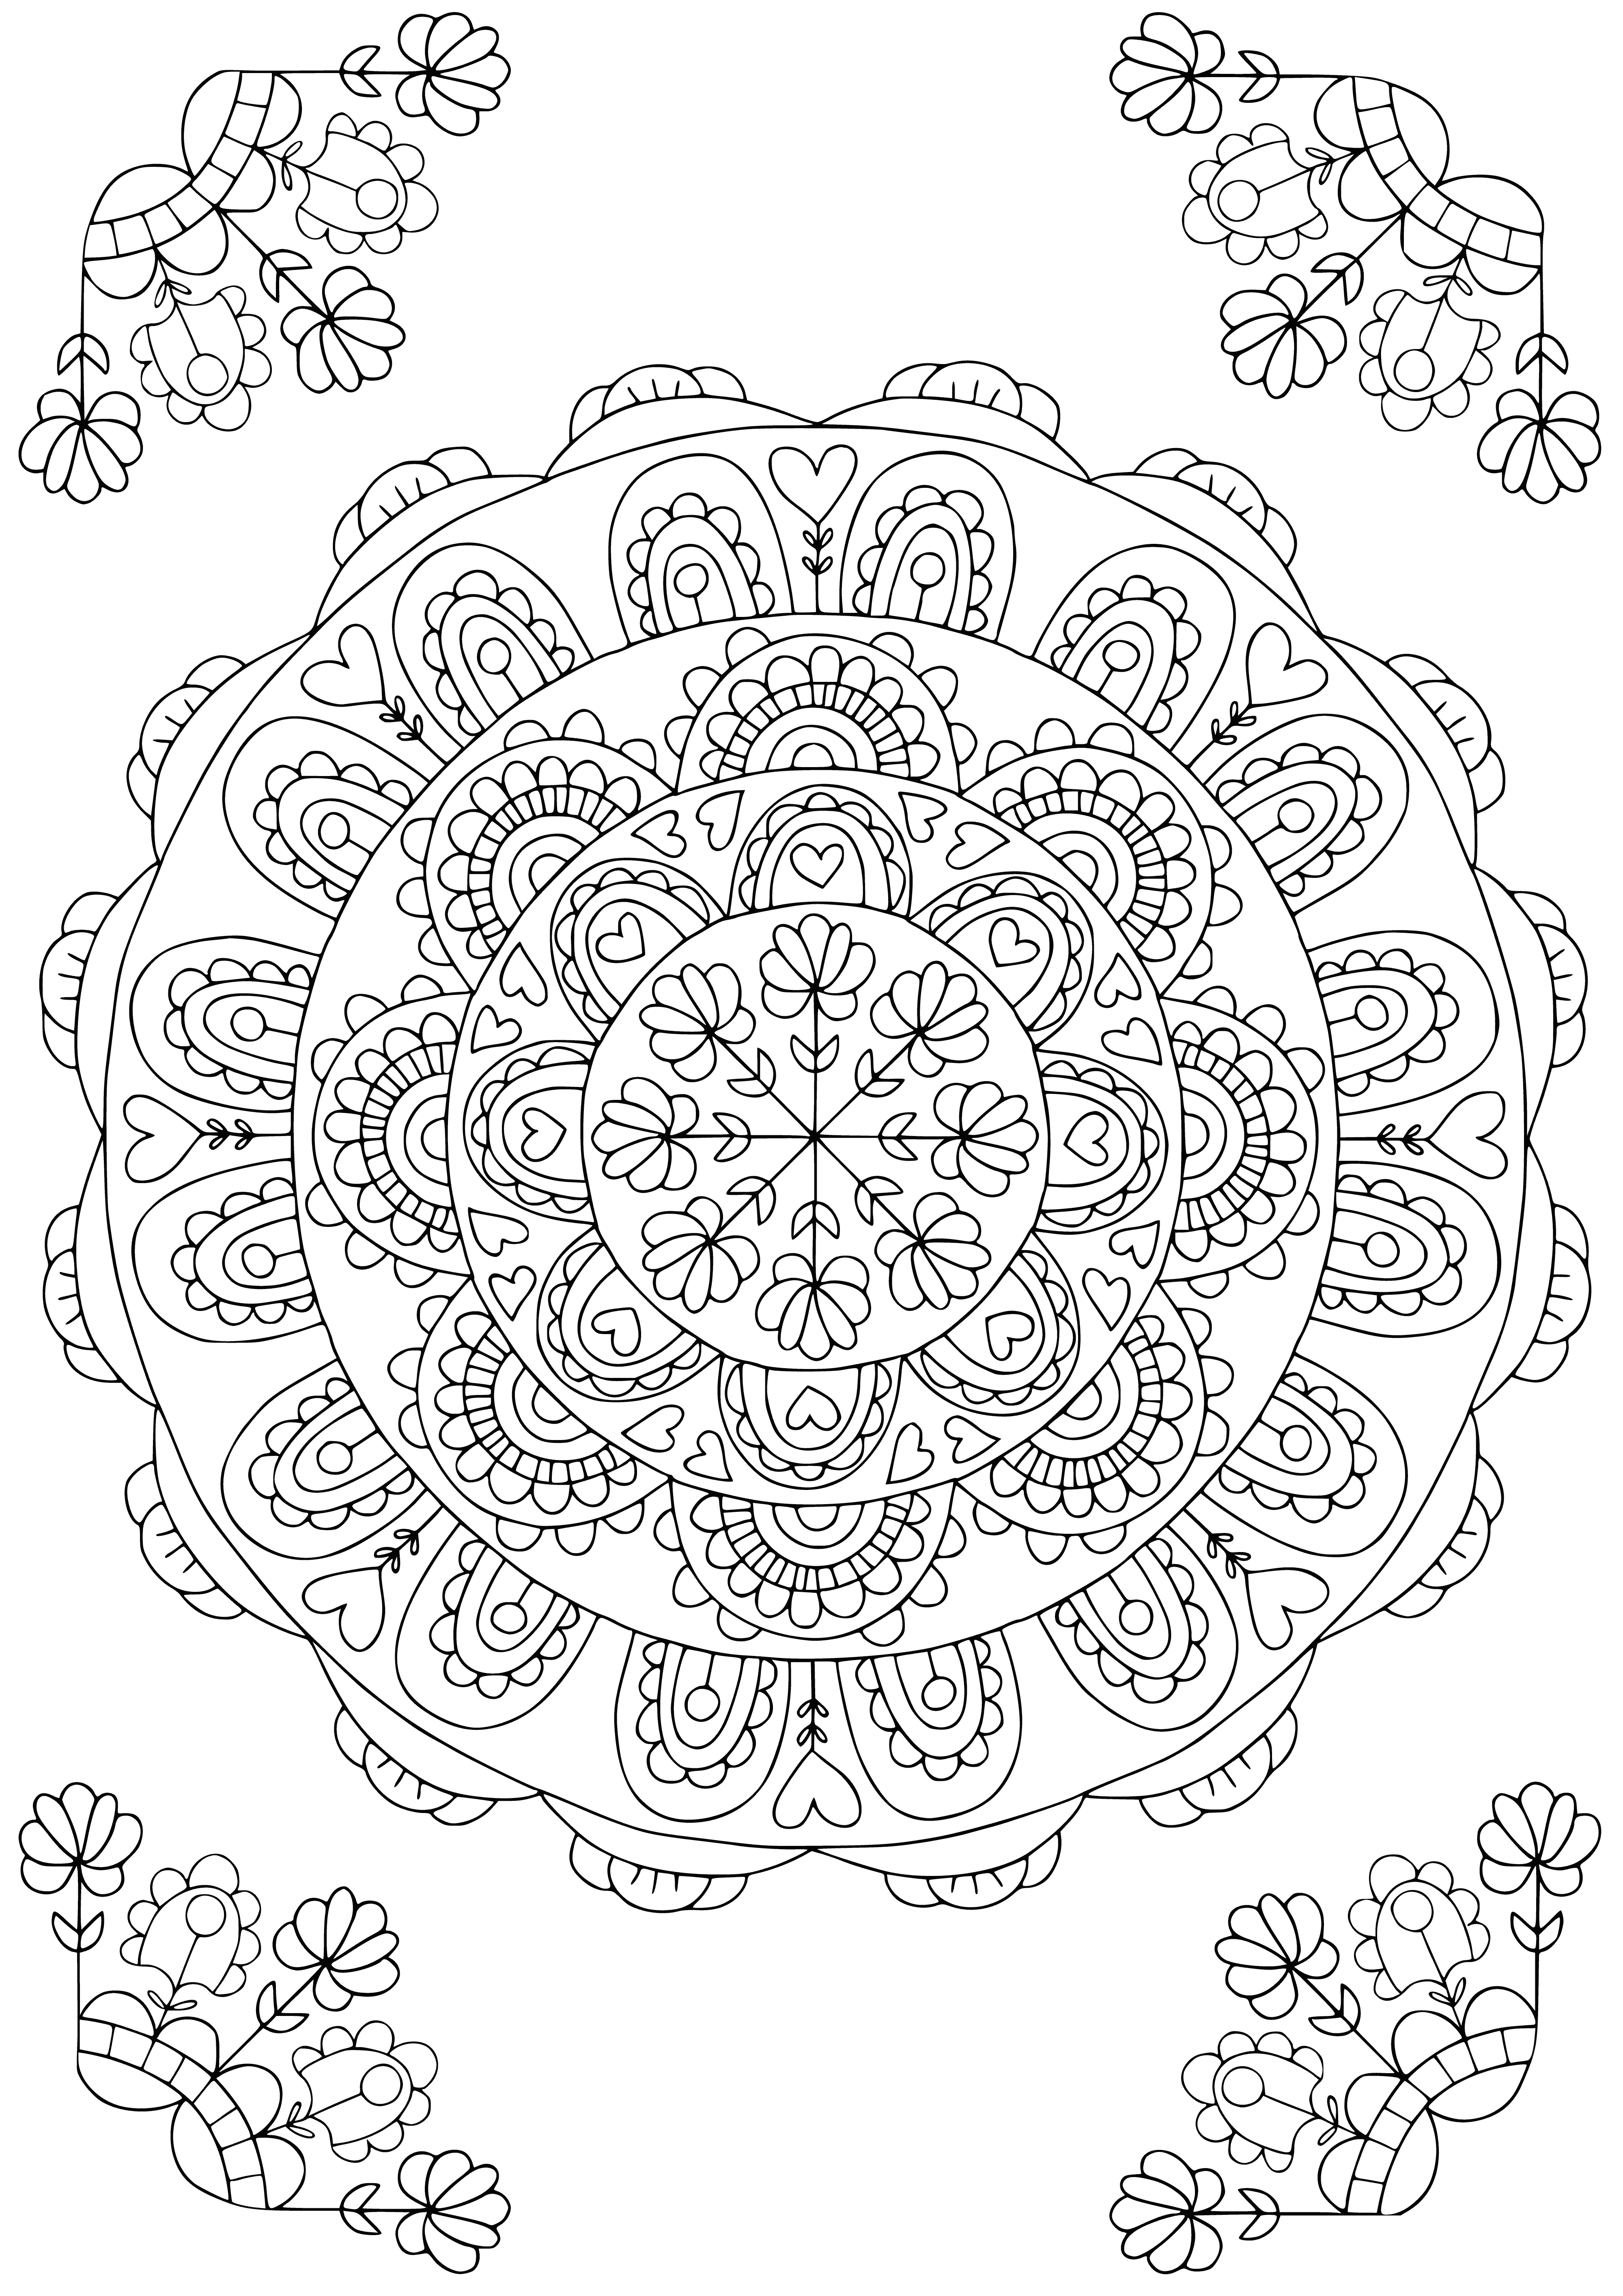 coloring page: Explore multiple intricate mandalas for relaxing, therapeutic benefits. Choose a complex or simple design for coloring & unleash your creativity!